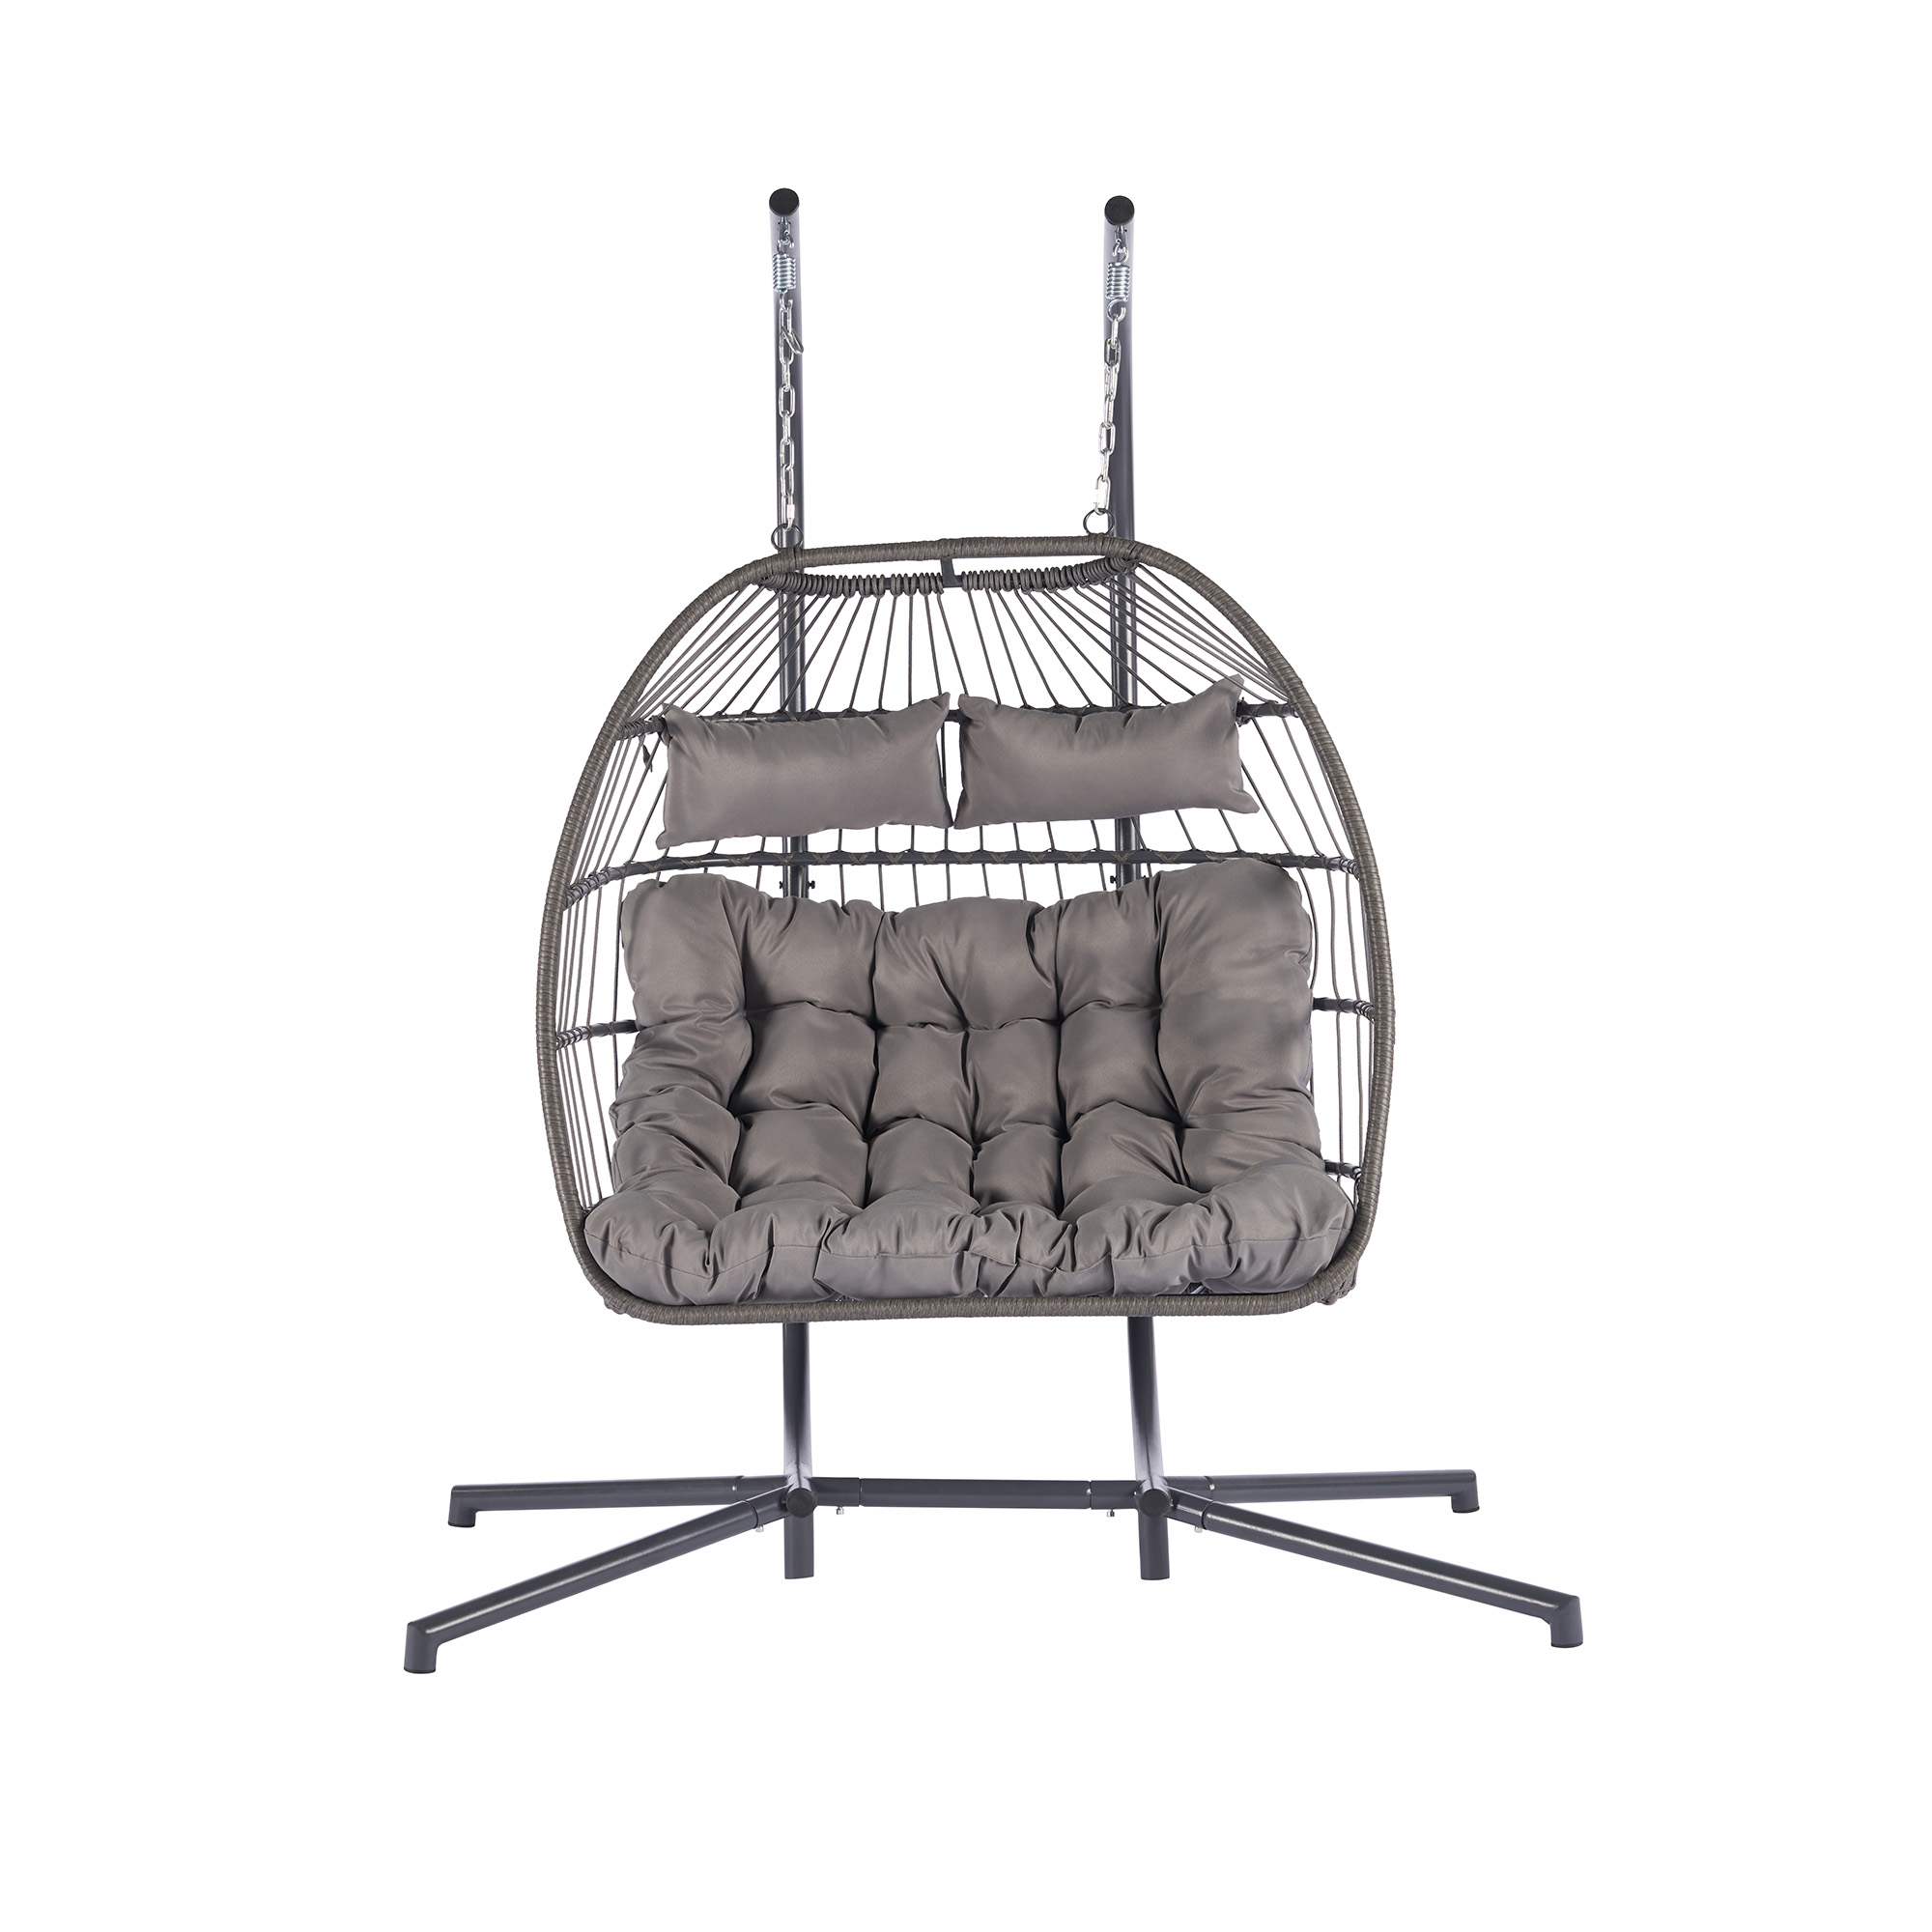 BTMWAY 2 Person Wicker Egg Chair with Stand and Removable Cushion, Outdoor Indoor Swing Hammock Chair Hanging Basket Chair for Patio Balcony Porch Living Room, Light Gray - image 3 of 9